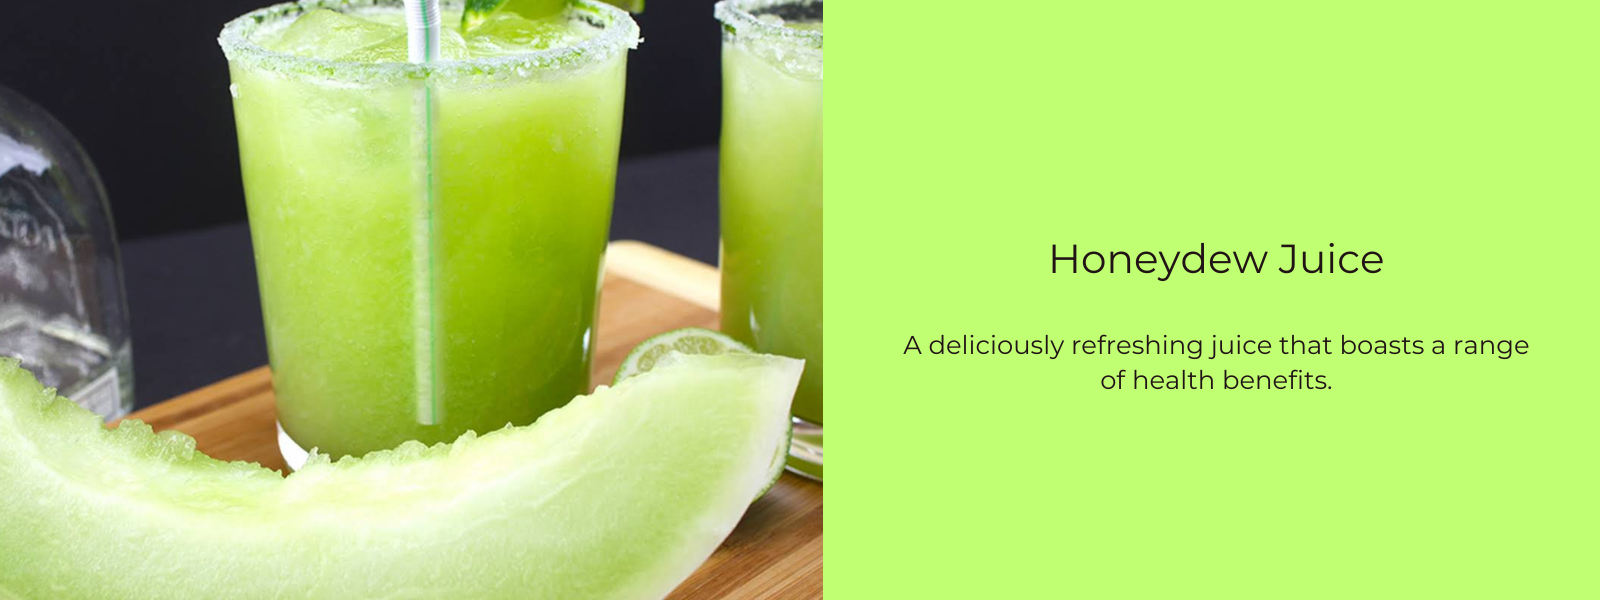 Honeydew Juice – Health Benefits, Uses and Important Facts